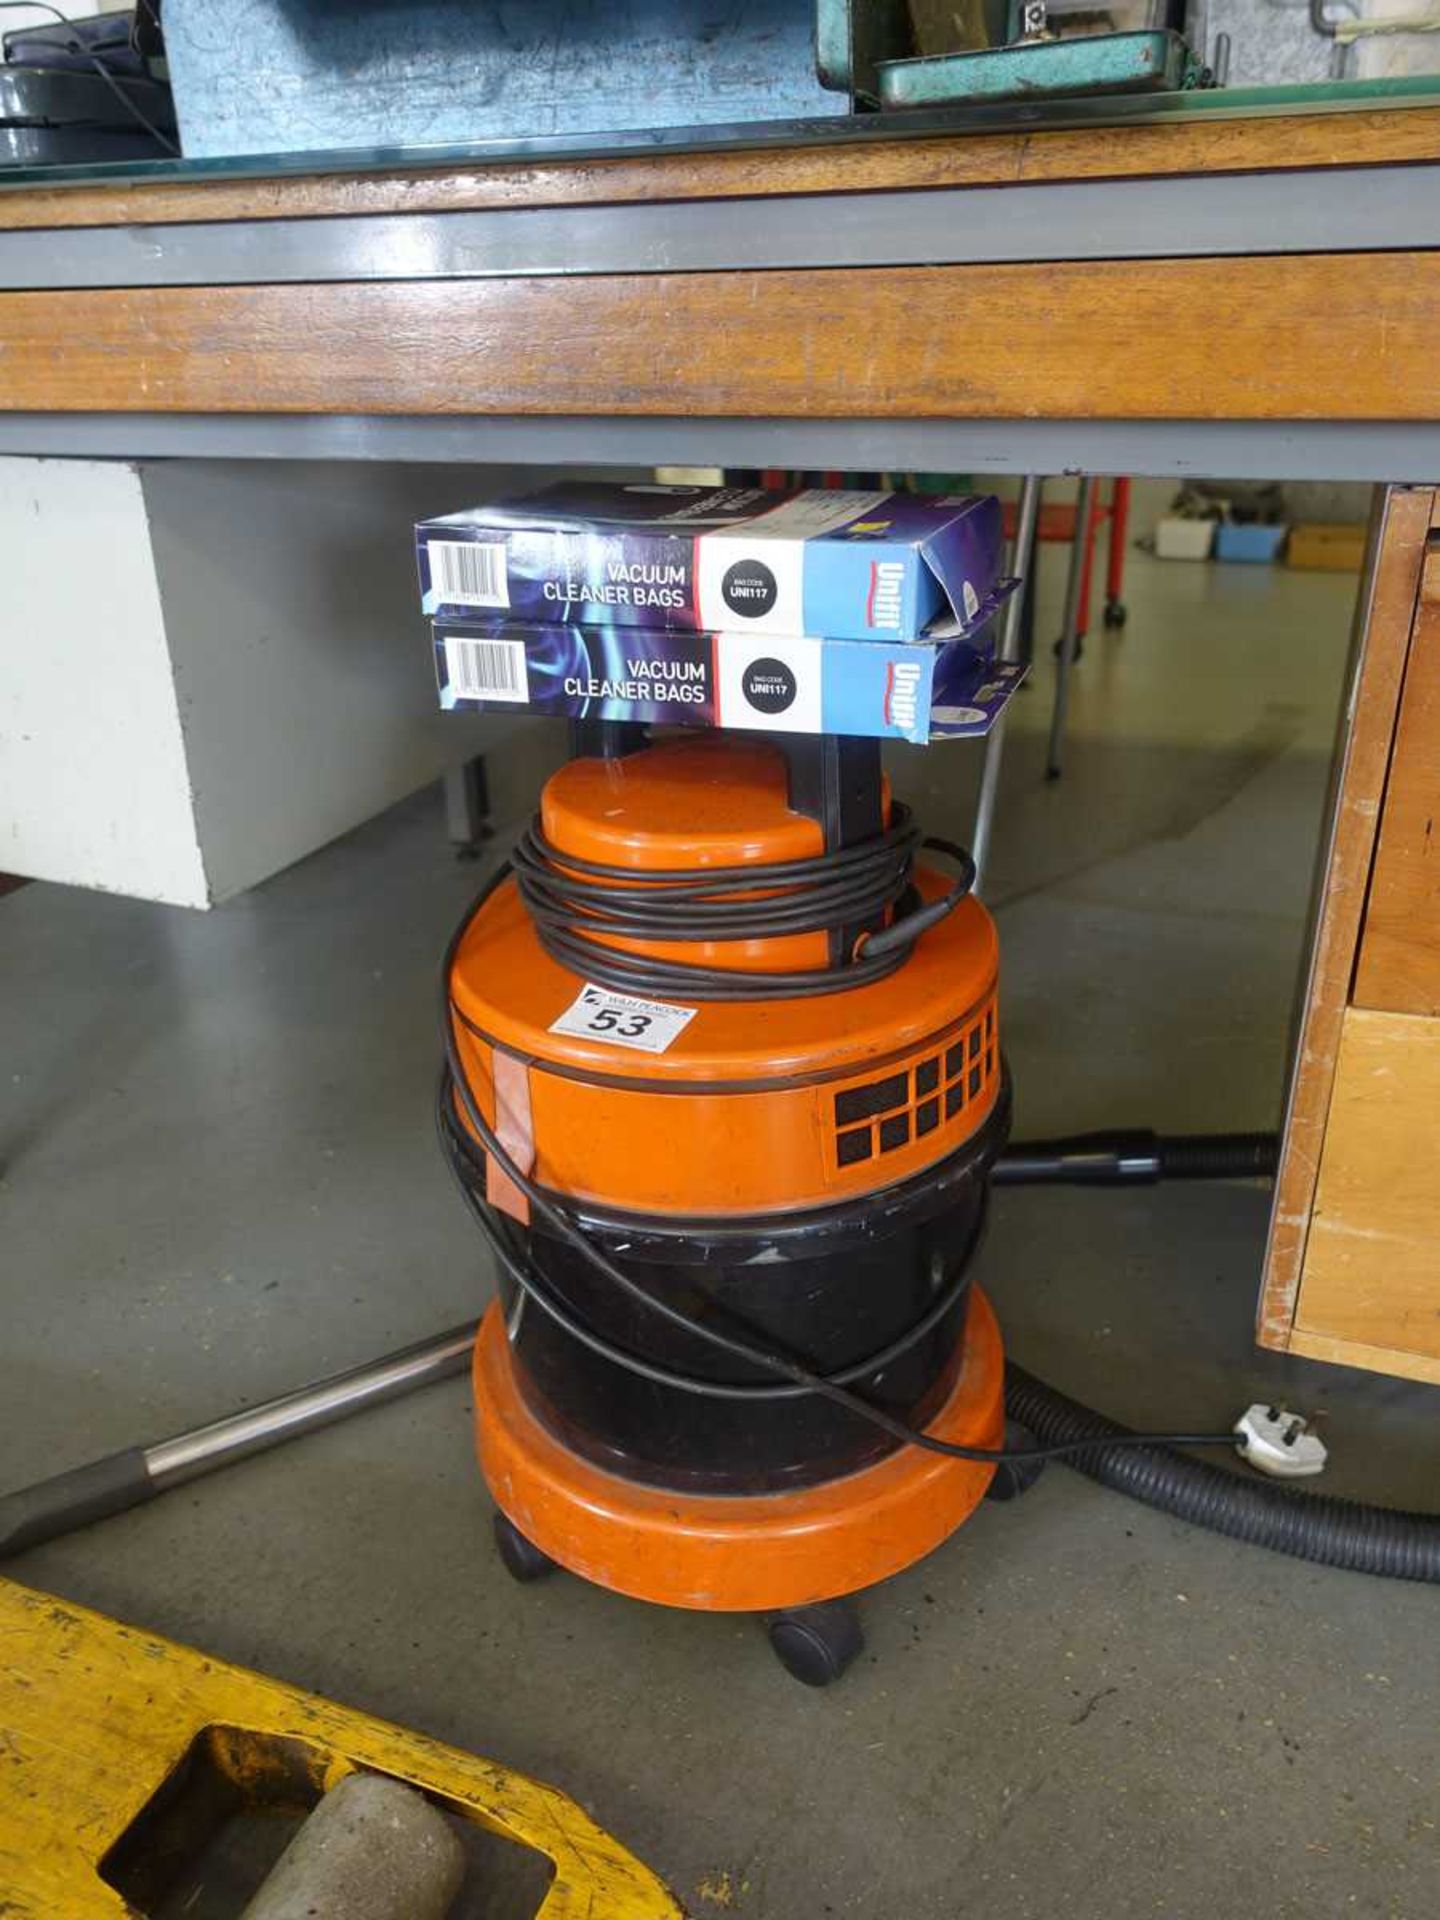 +VAT Vax 2000 drag along cylinder vacuum cleaner and spare bags - Image 2 of 2